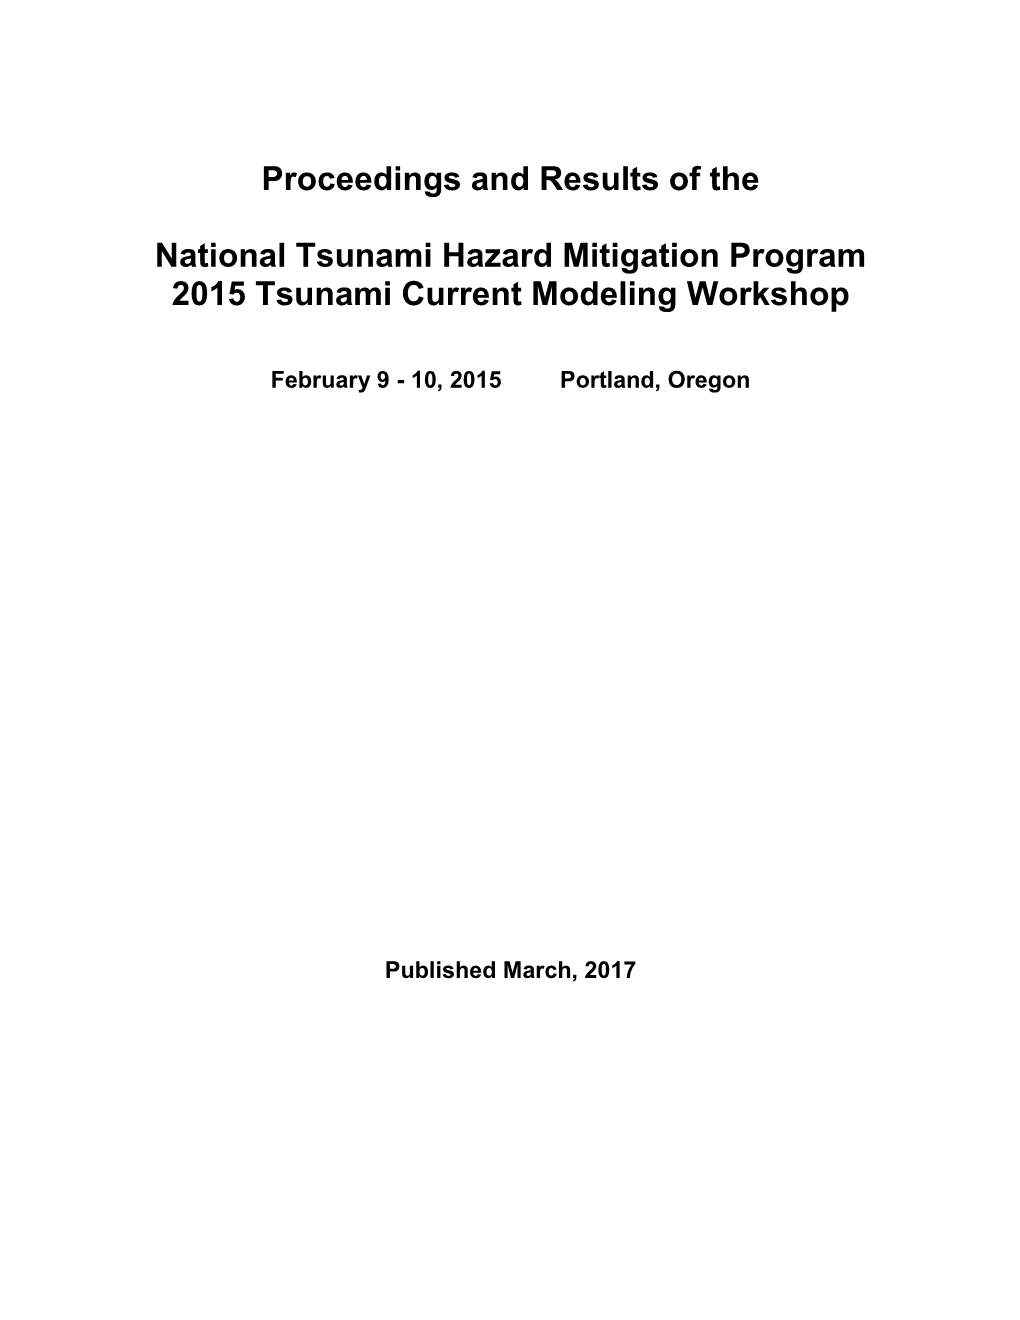 Proceedings and Results of the National Tsunami Hazard Mitigation